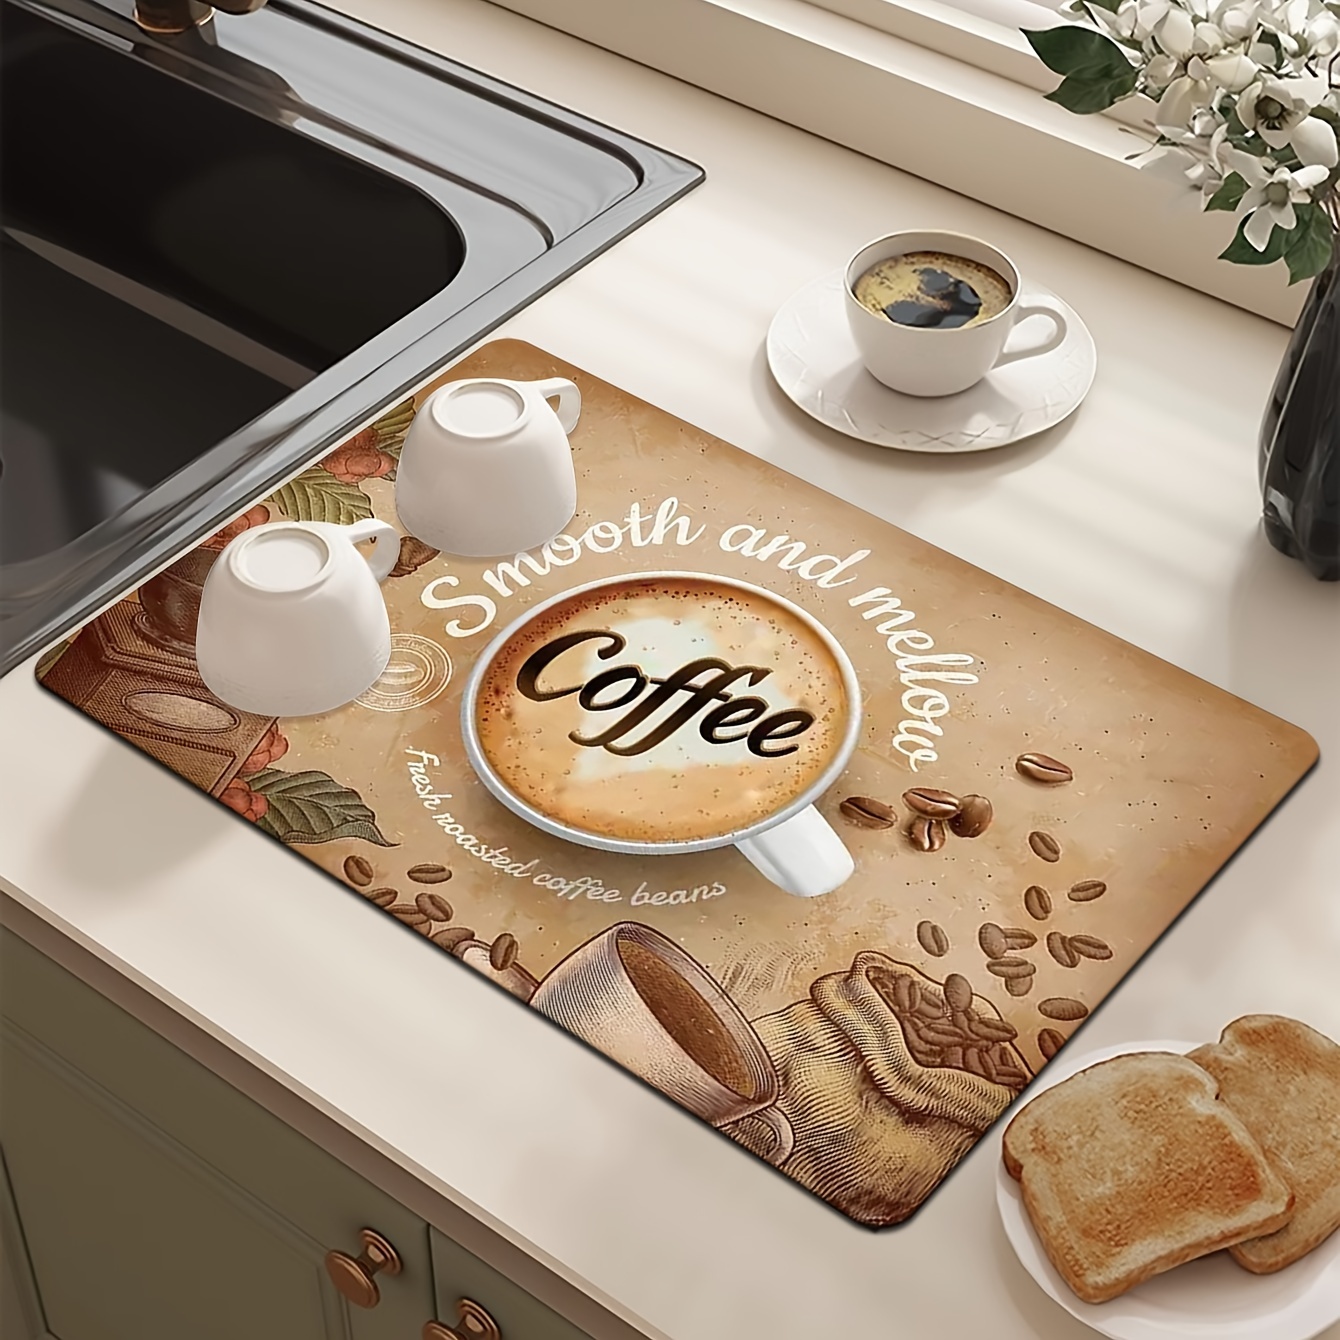 Coffee Dish Super Absorbent Anti-slip Large Kitchen Absorbent Draining Mat  Drying Mat Quick Dry Bathroom Drain Pad Placemat